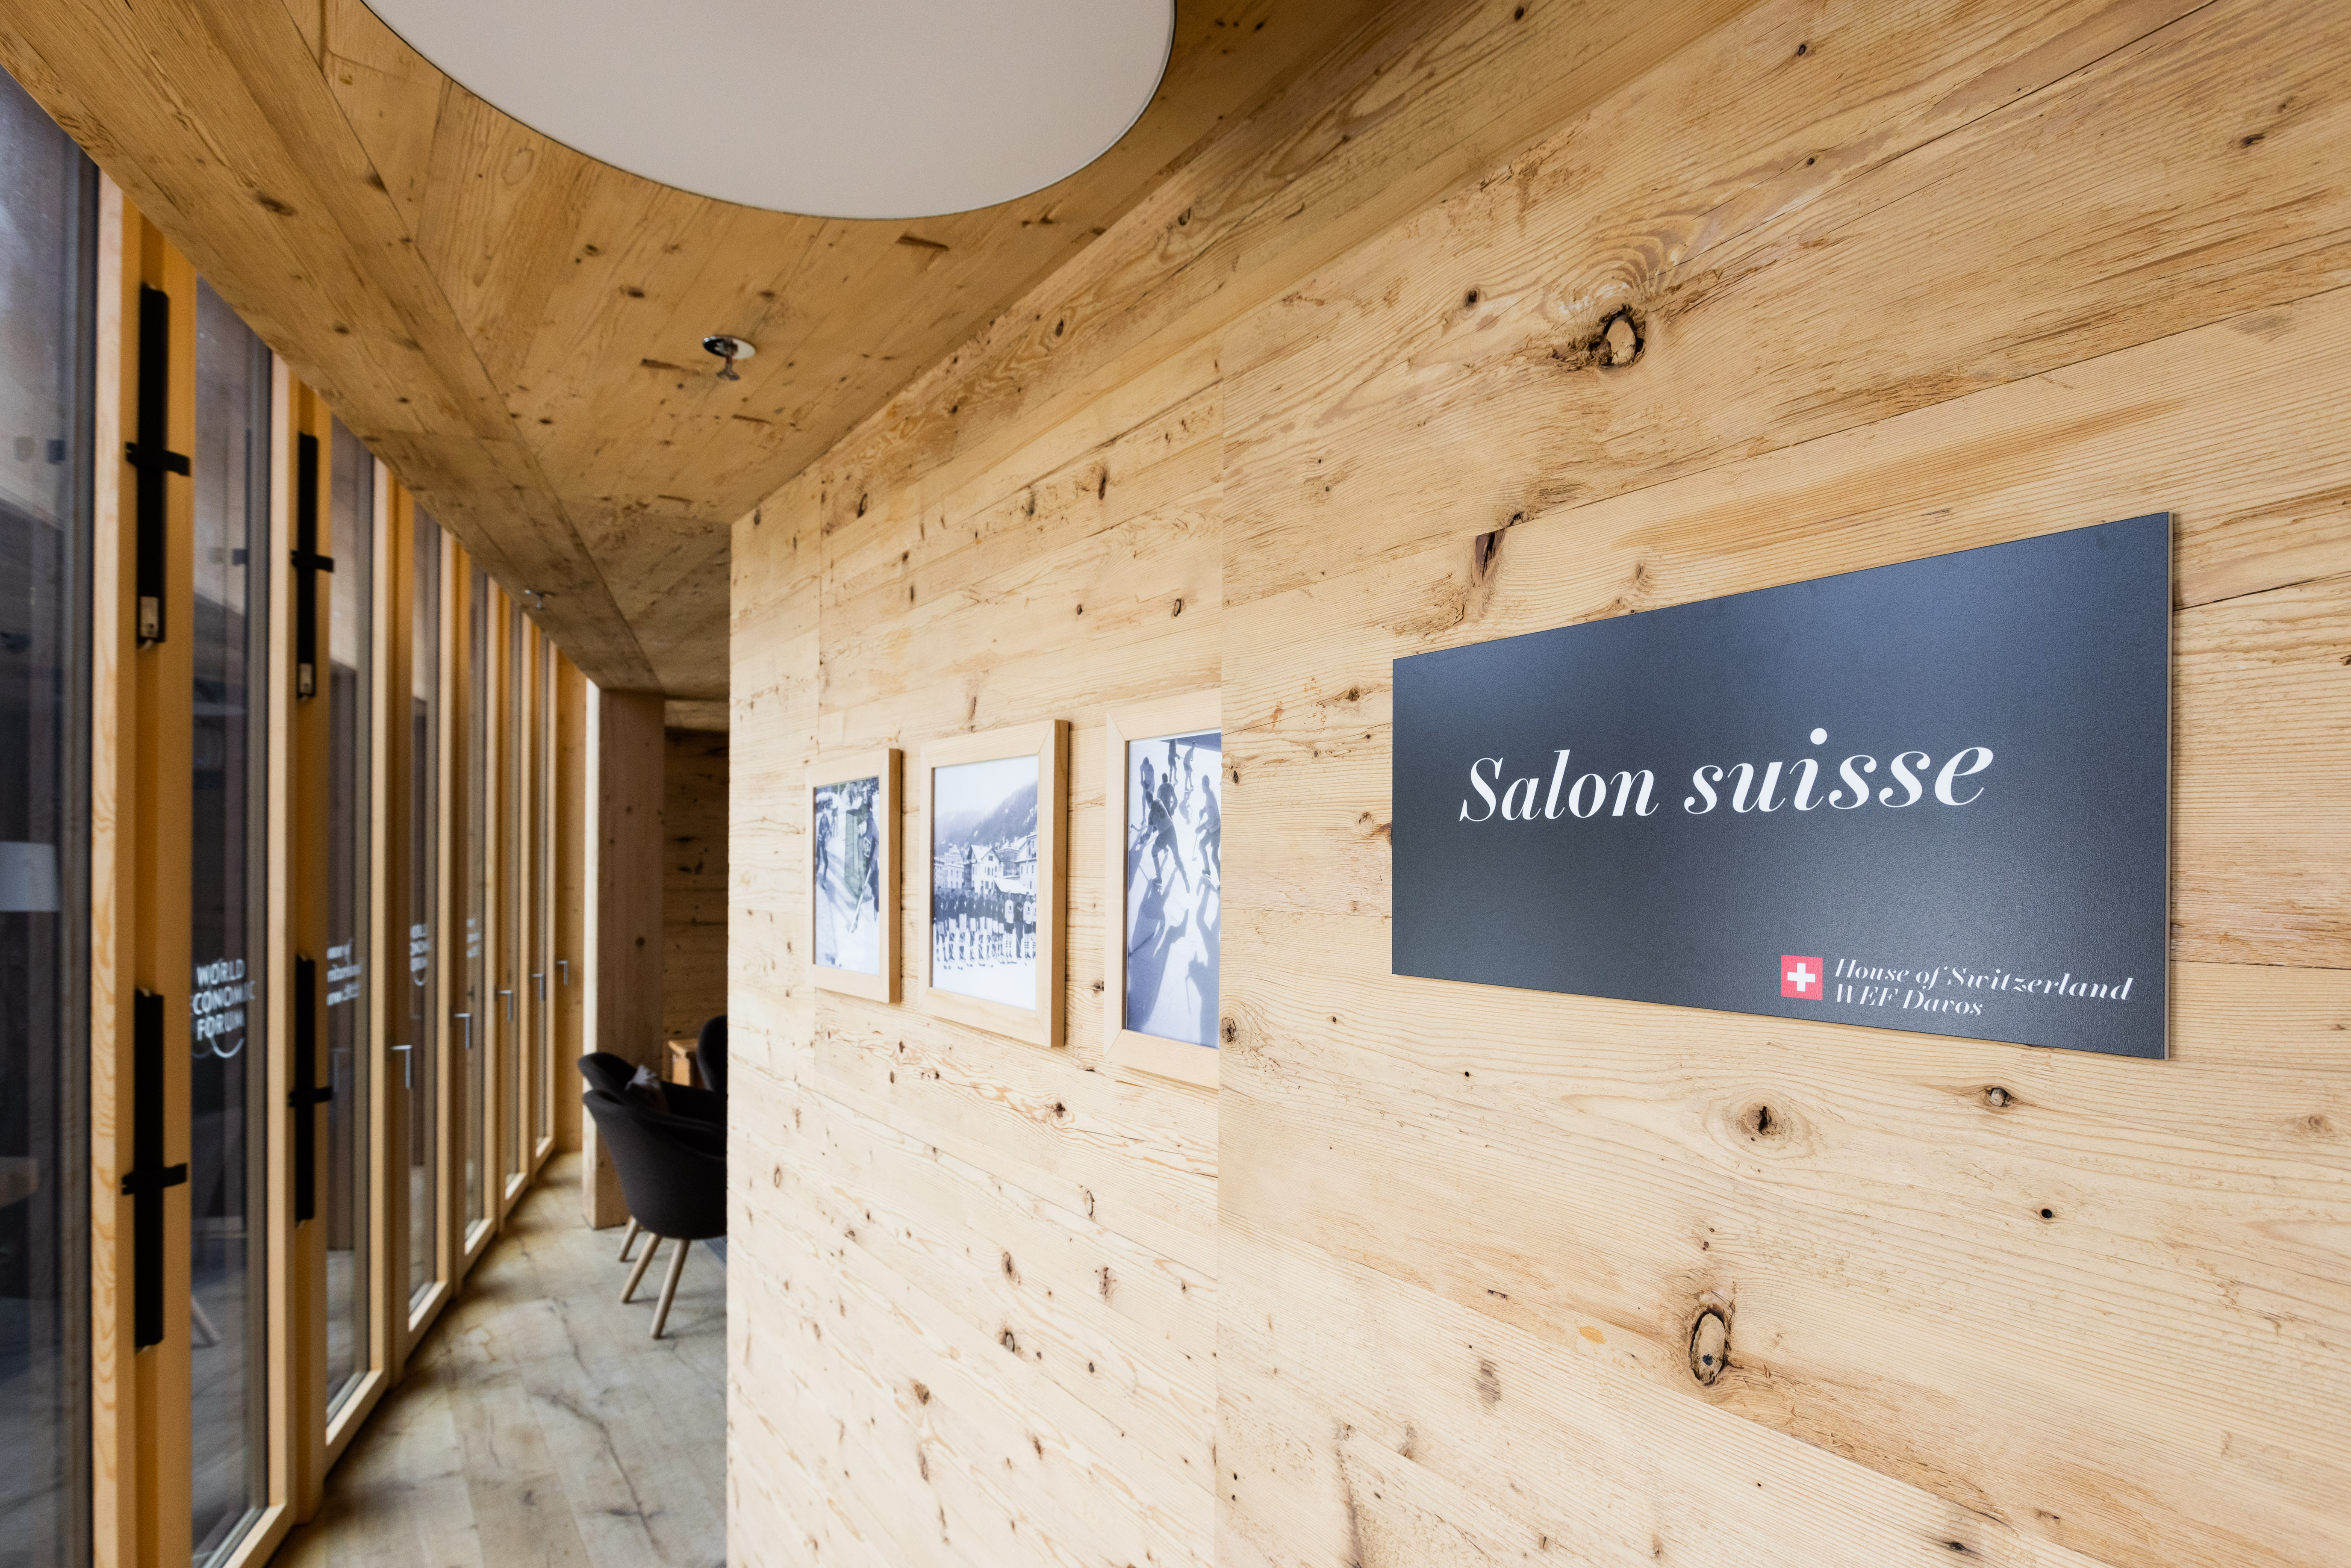 The entrance to the Salon Swiss in the House of Switzerland WEF 22